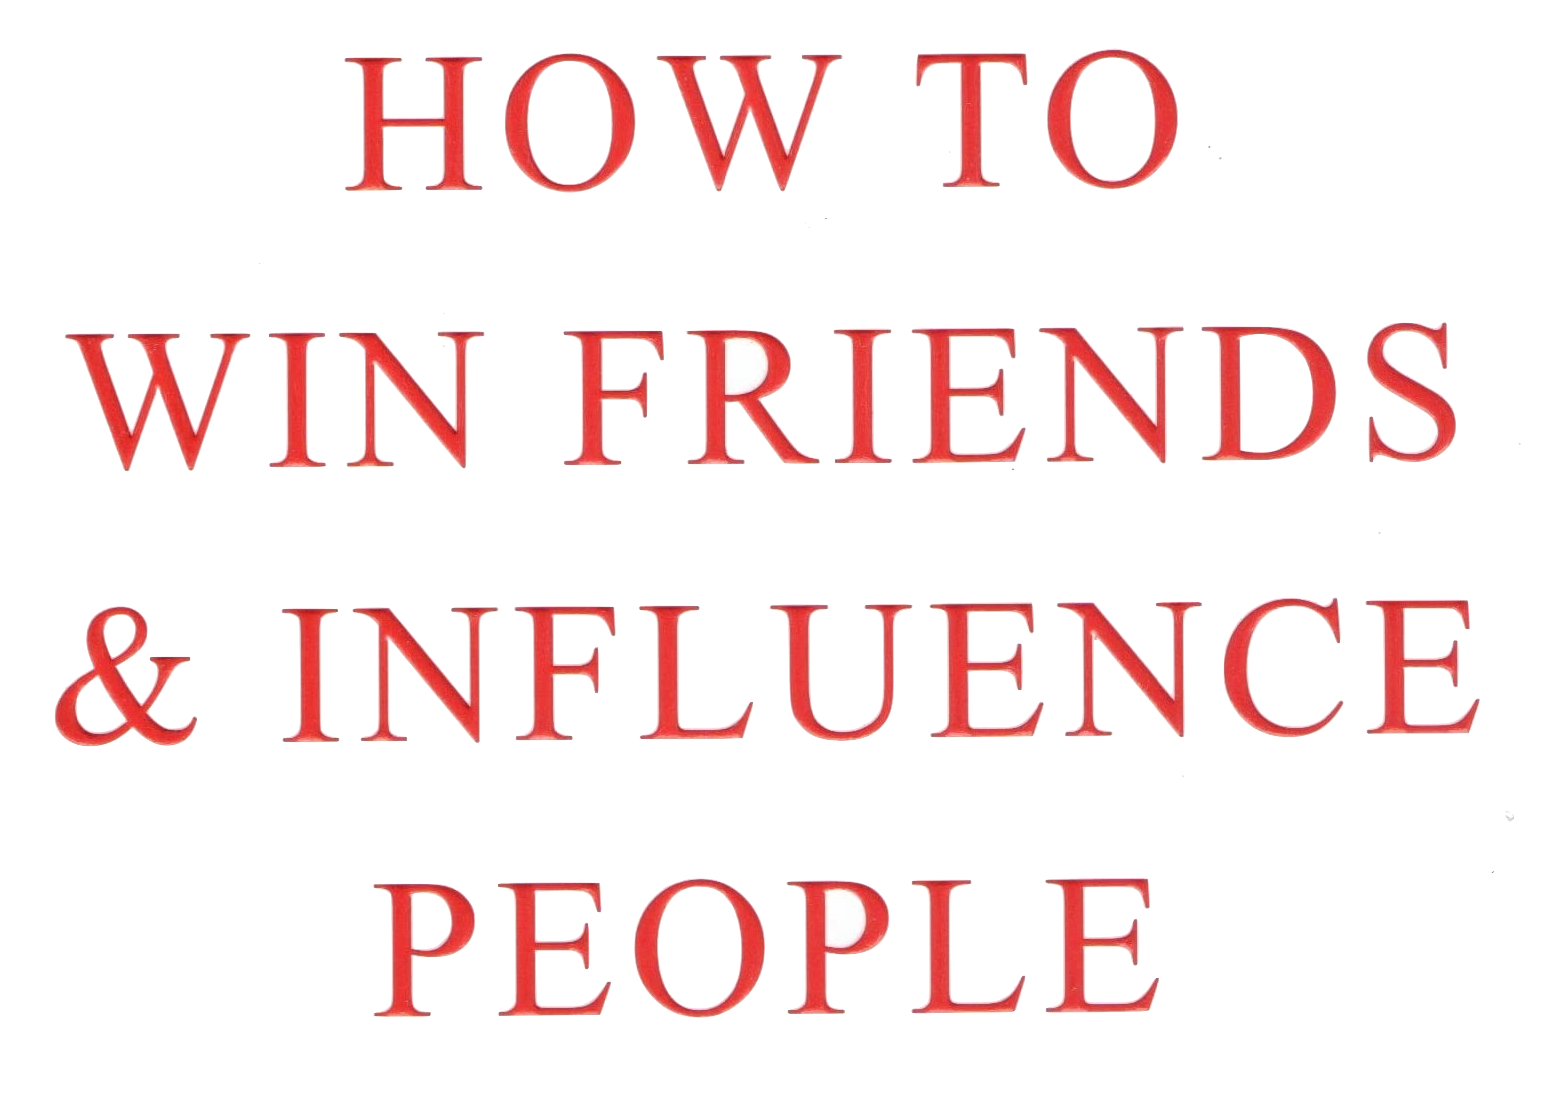 How to Win Friends and Influence People: The Best Summary